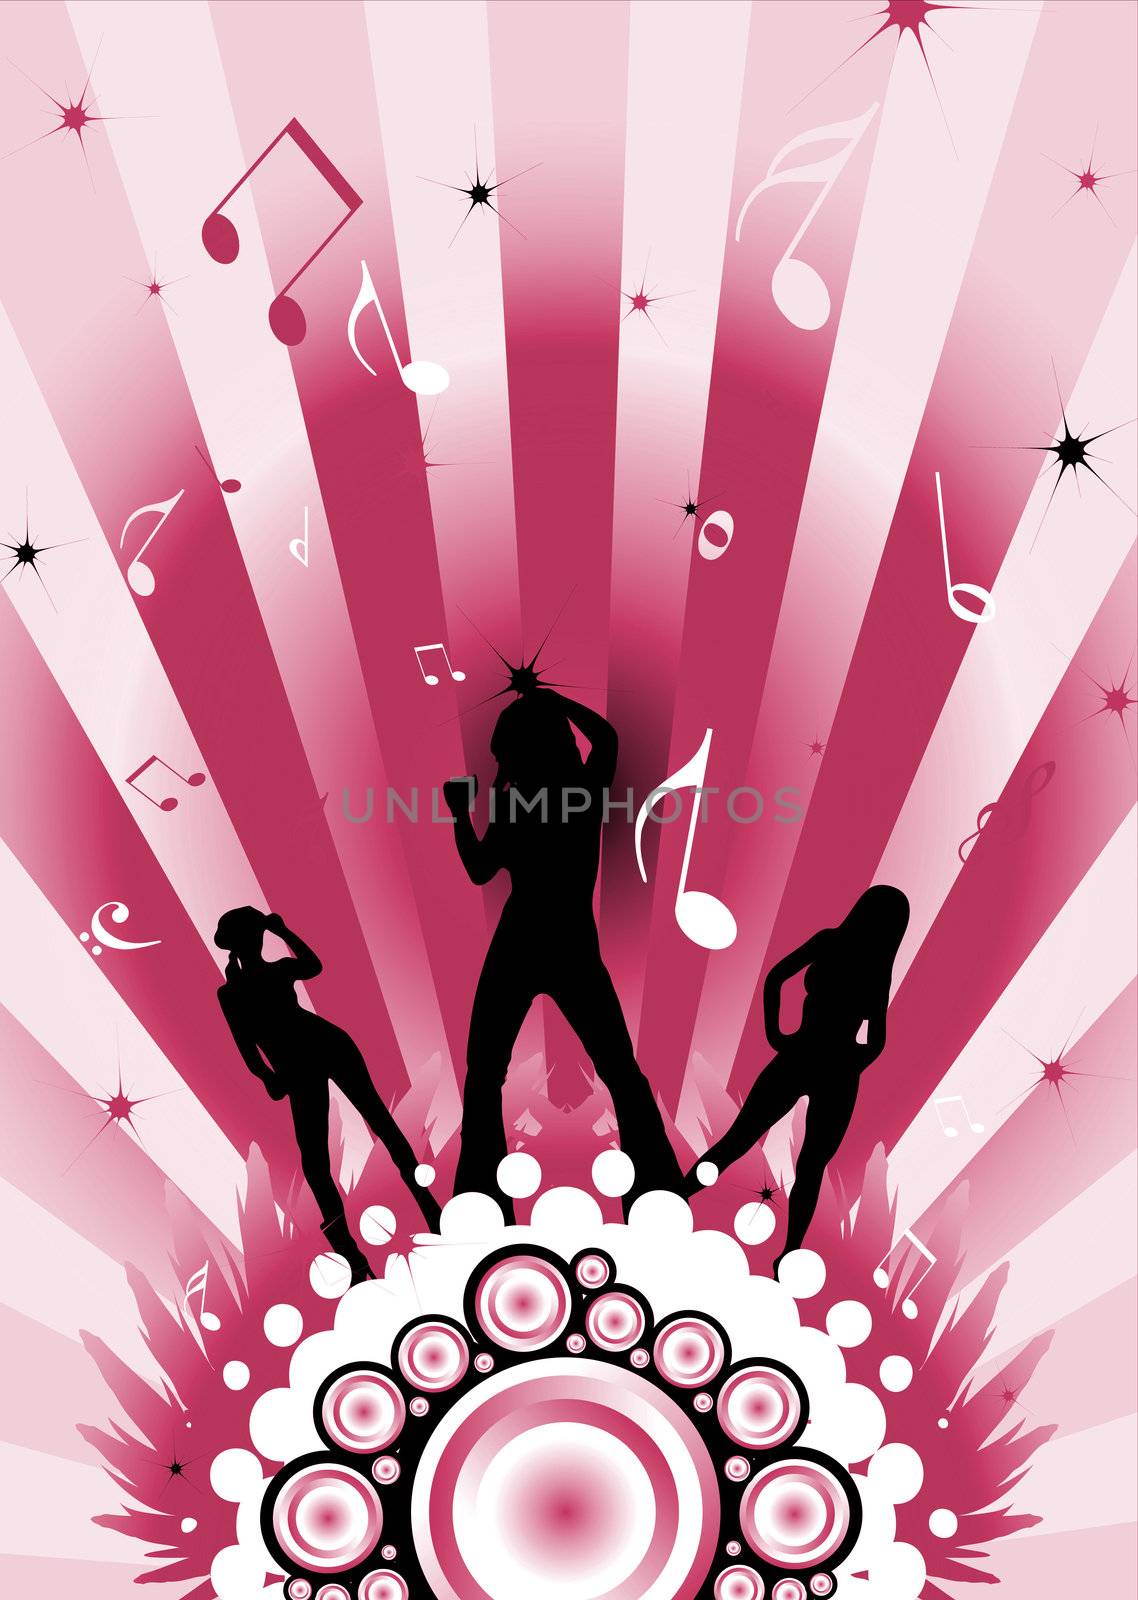 modern dancing image with three sexy women silhouettes